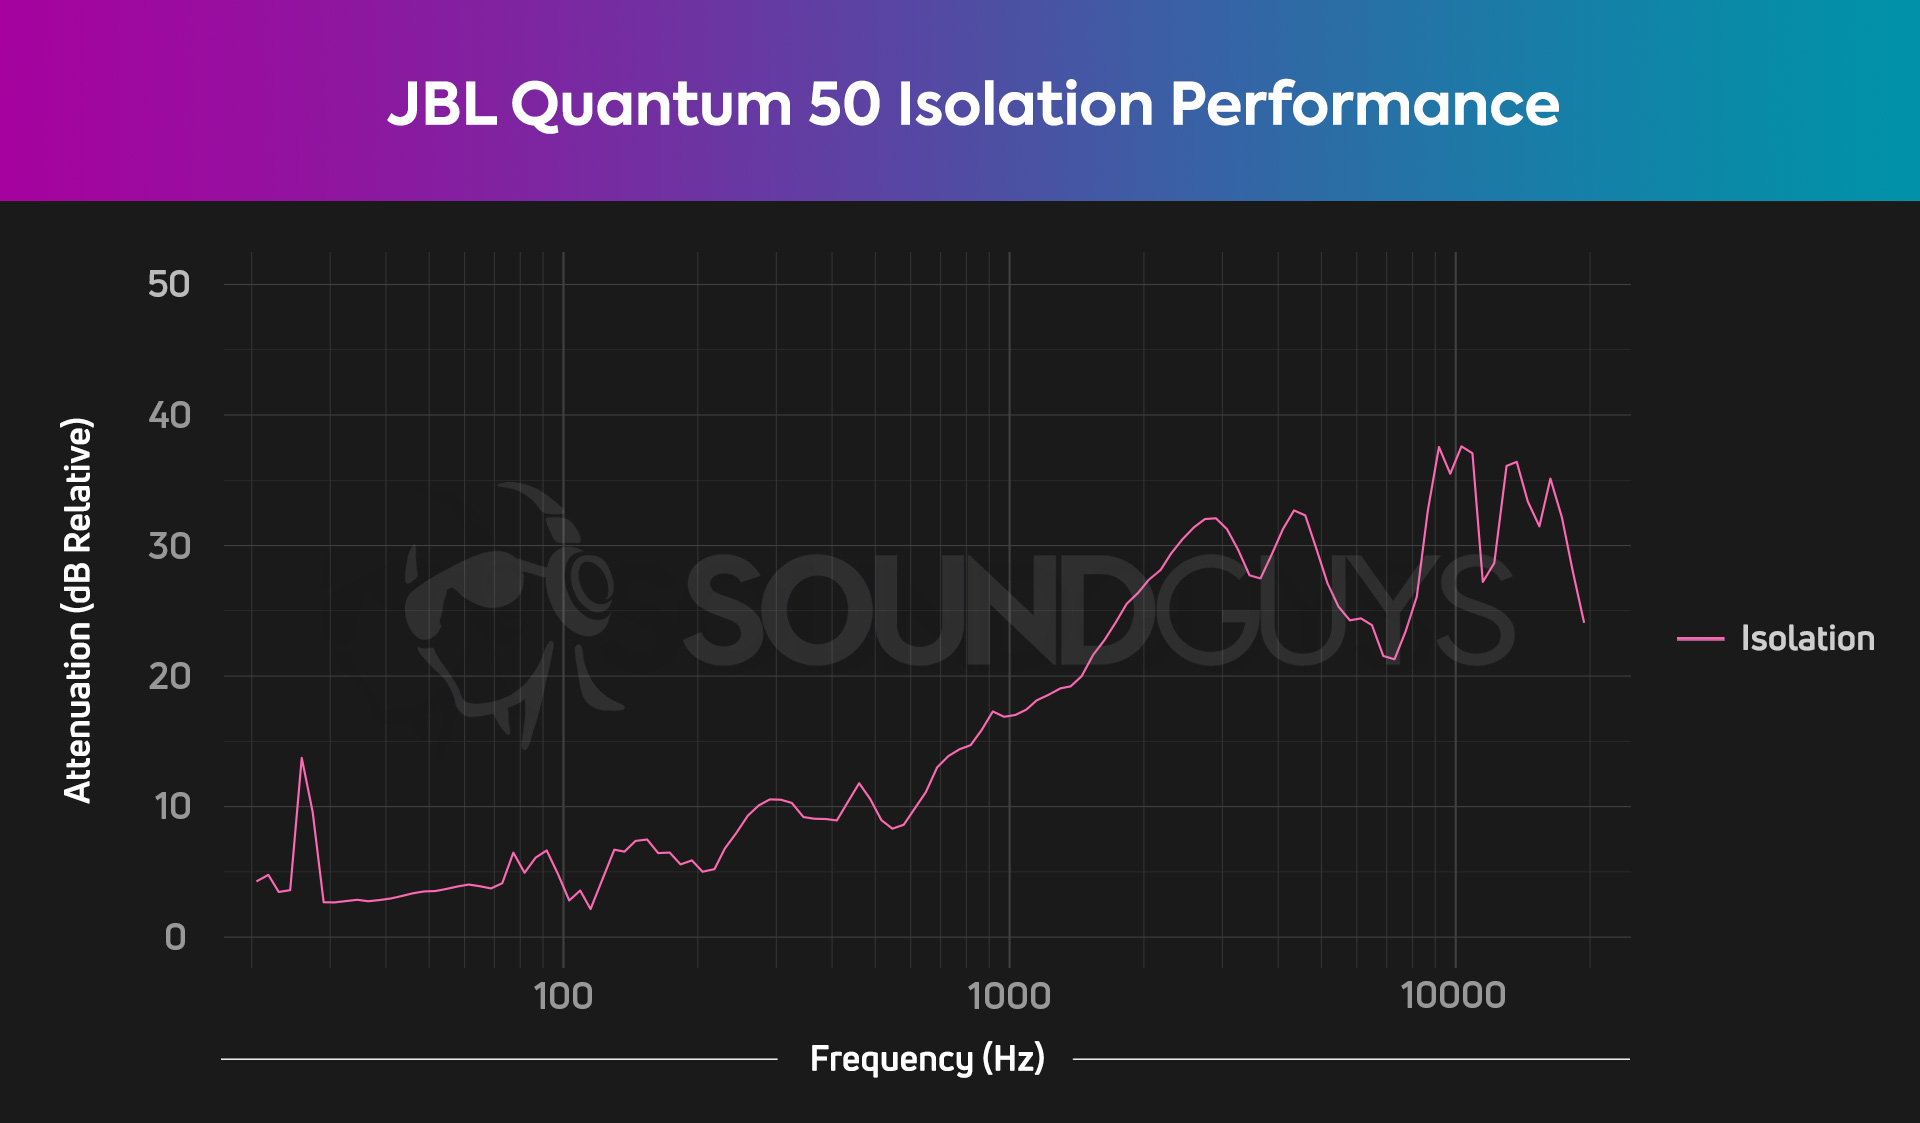 This is the isolation chart for the JBL Quantum 50 shows pretty good isolation if you get a good fit.